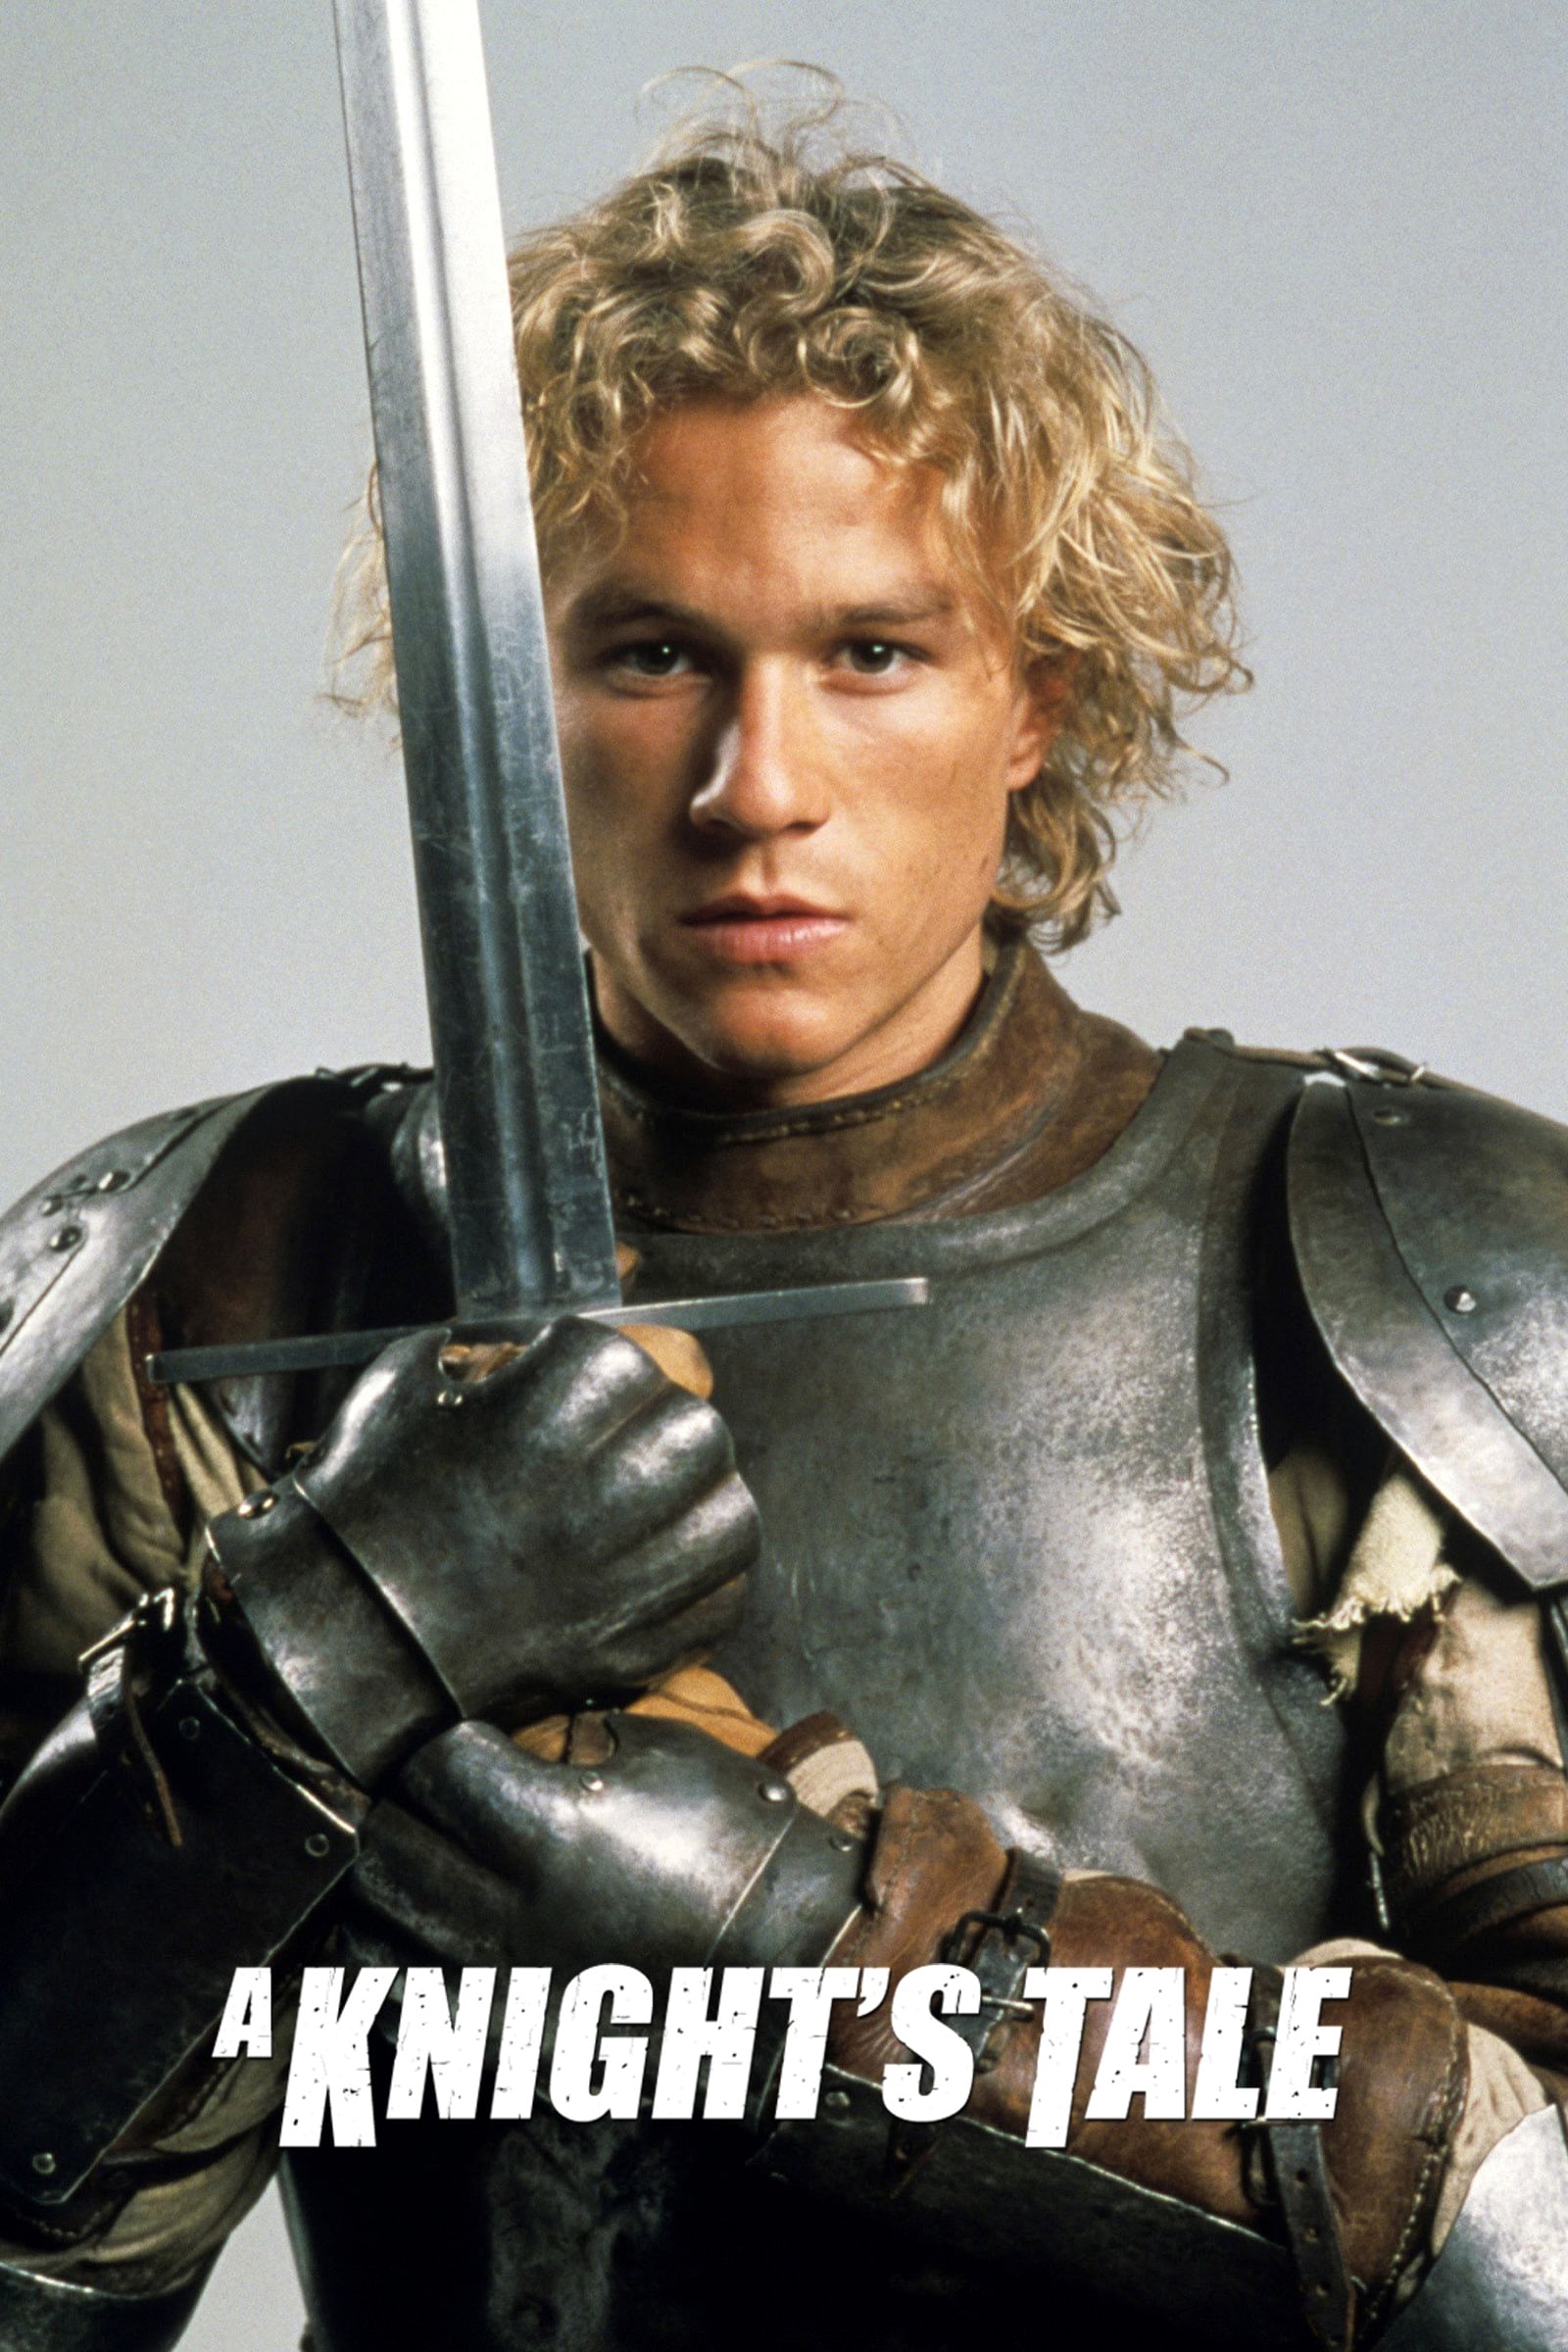 a knight's tale christian movie review